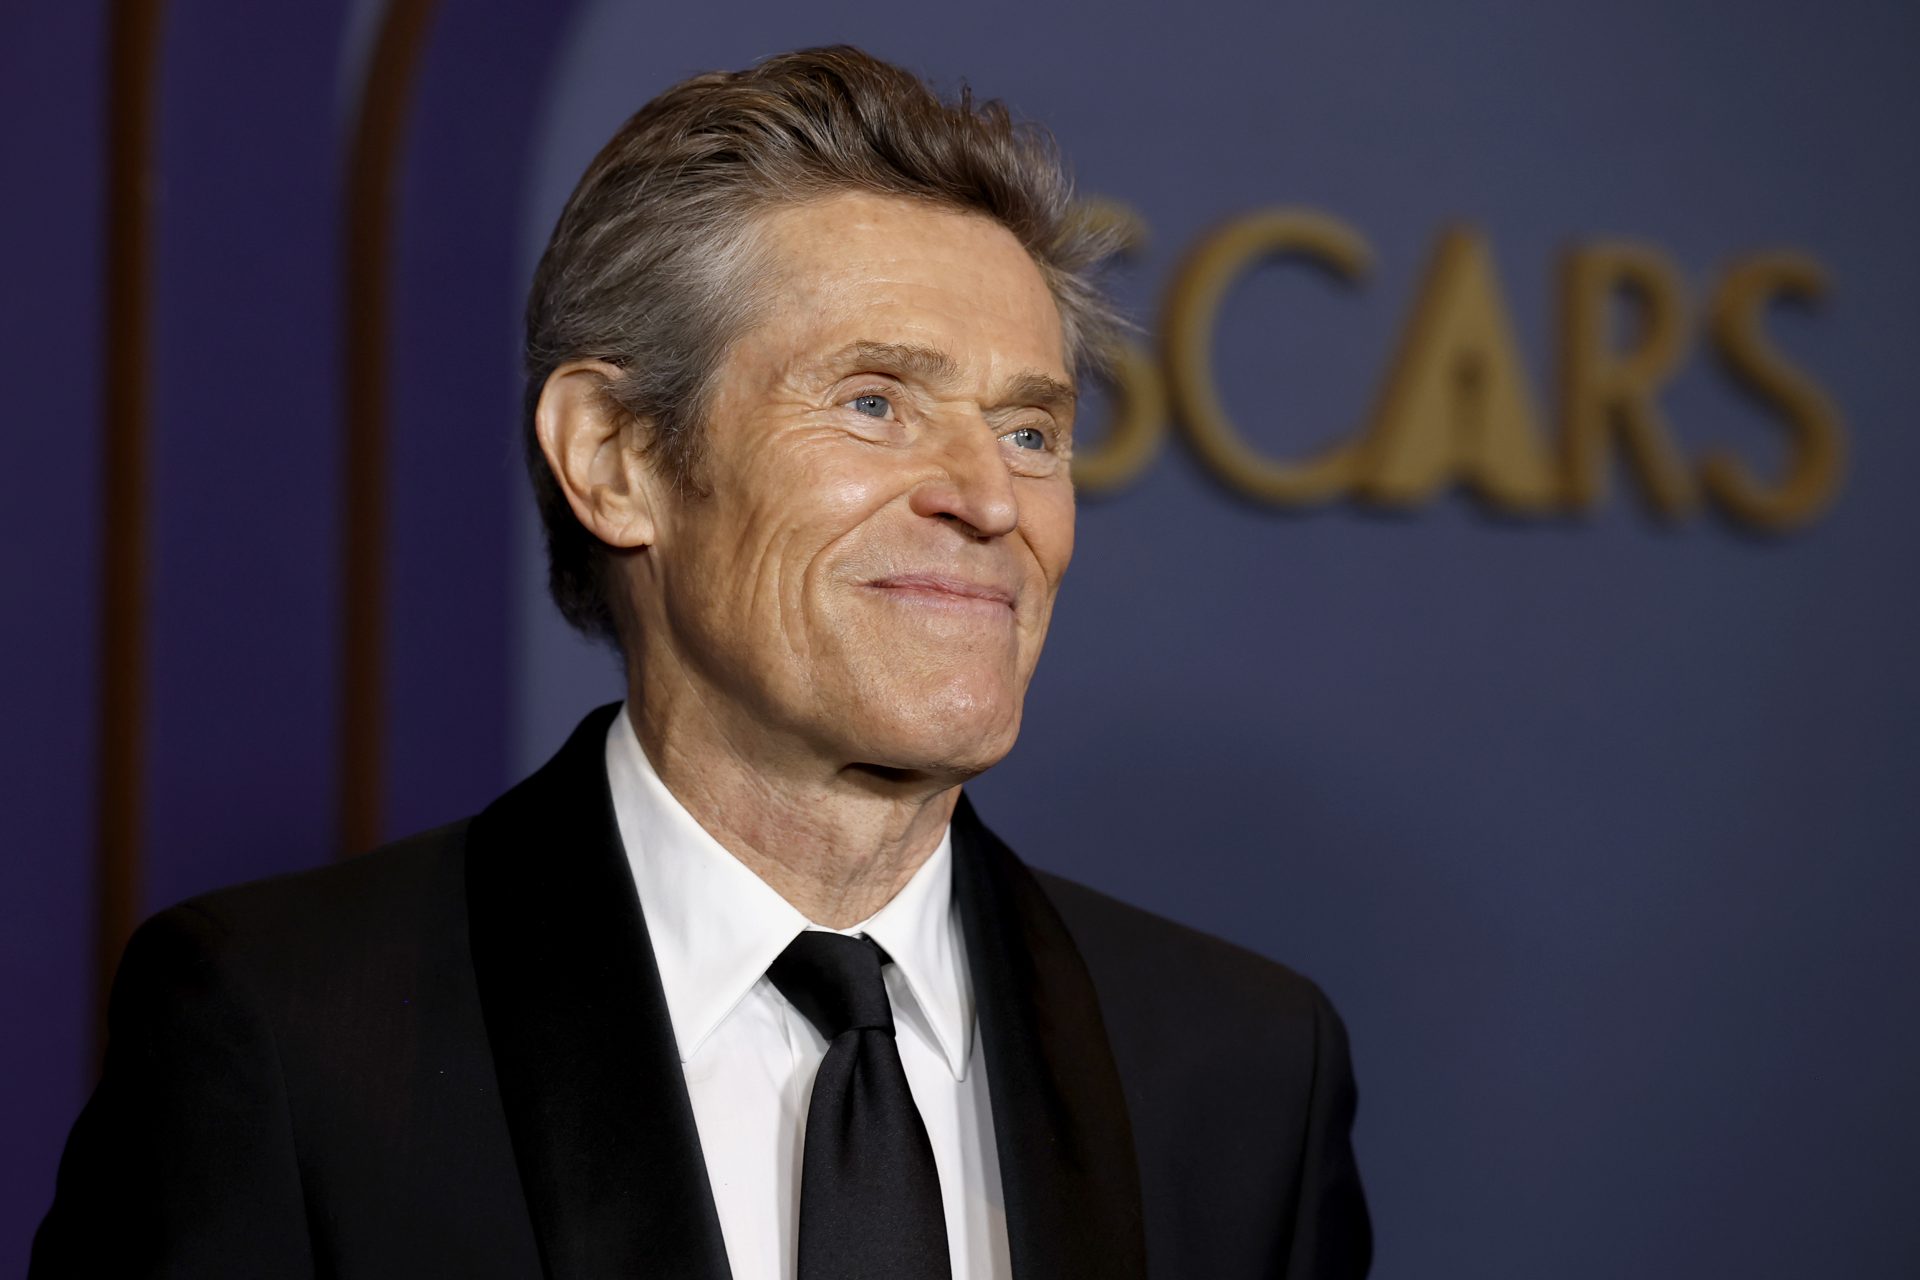 How many of Willem Dafoe's movies do you know?